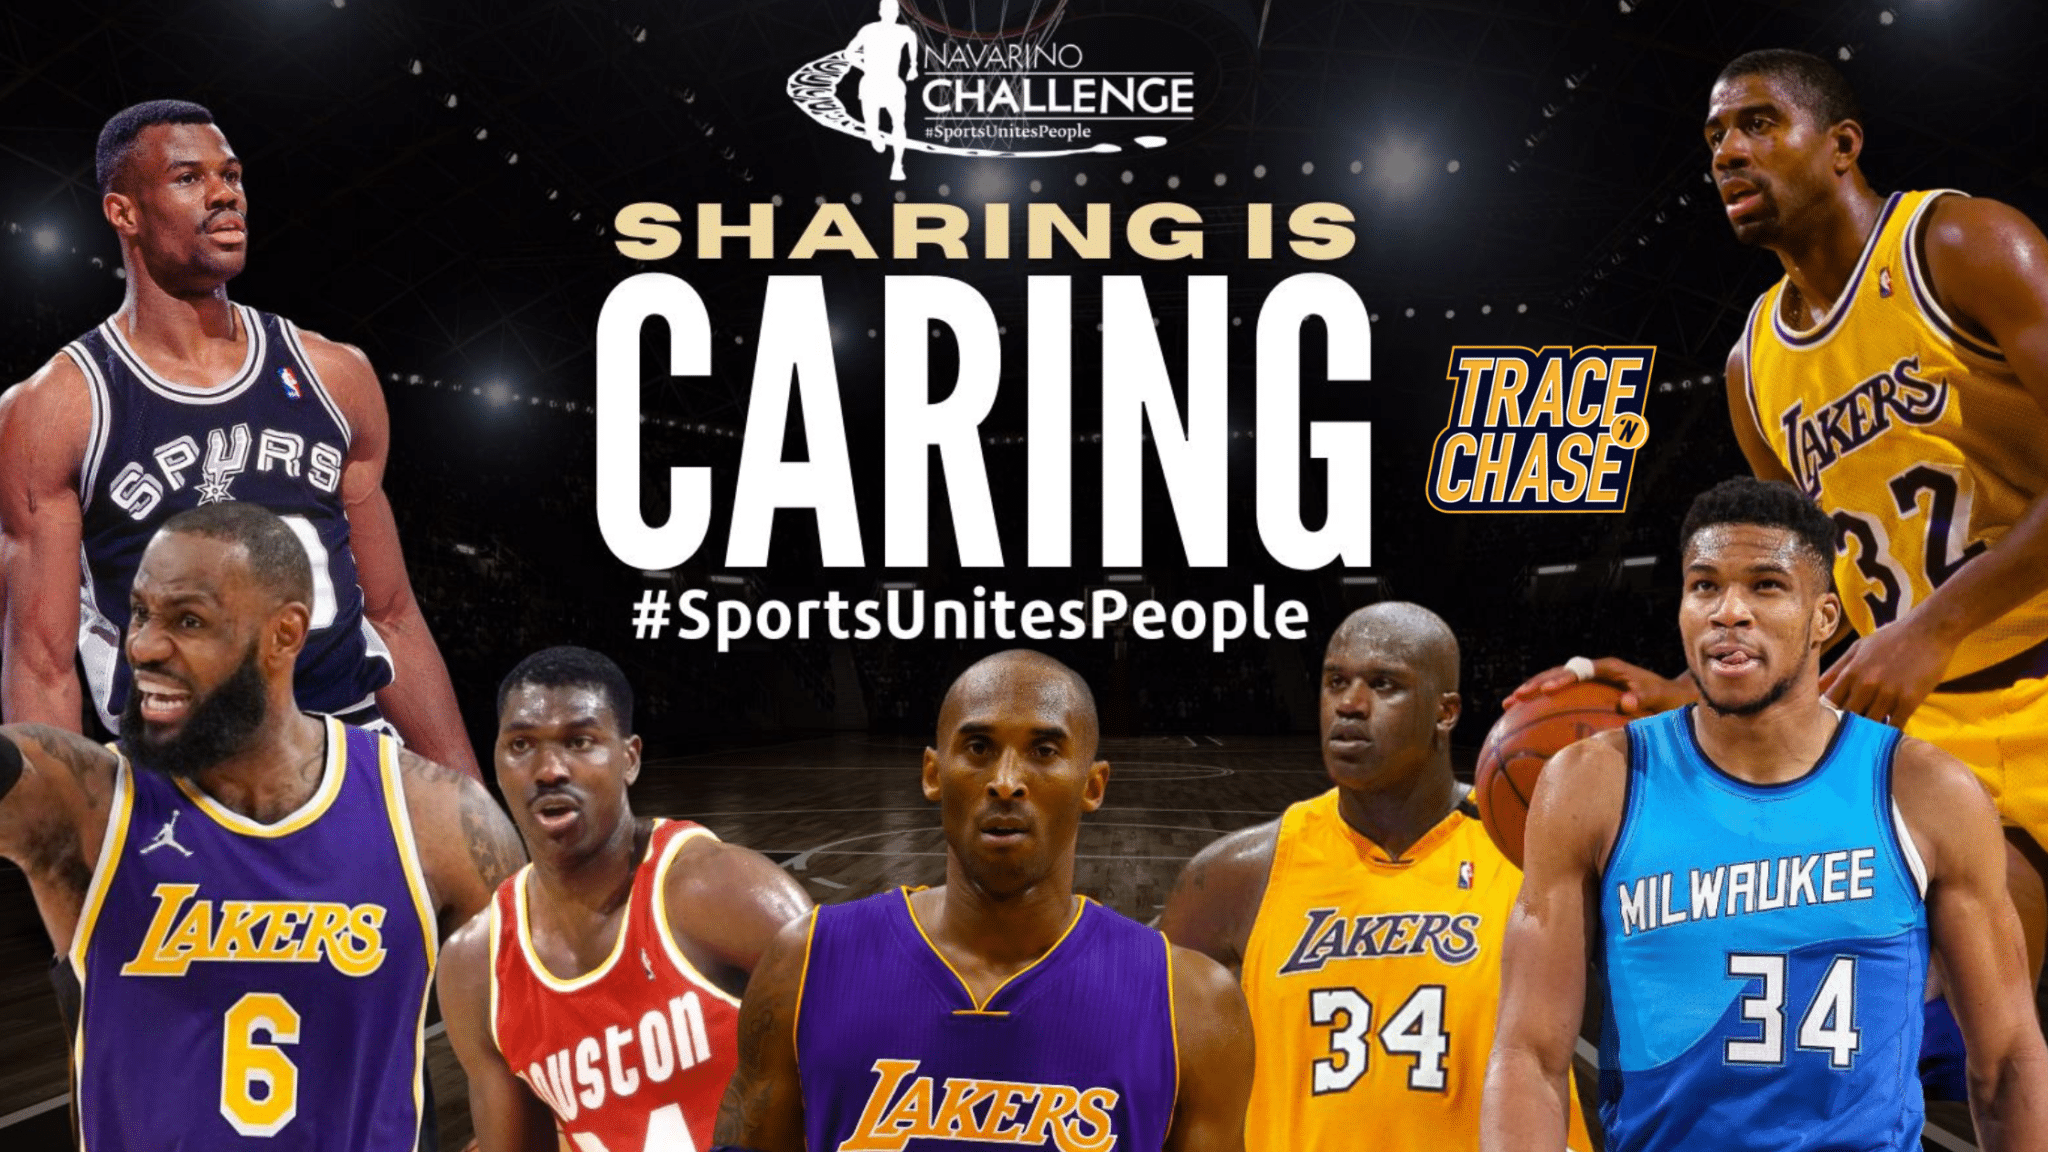 Trace 'n Chase Celebrates Third Year as Official Sports Memorabilia Partner for 'Sharing is Caring' Charity Auction!